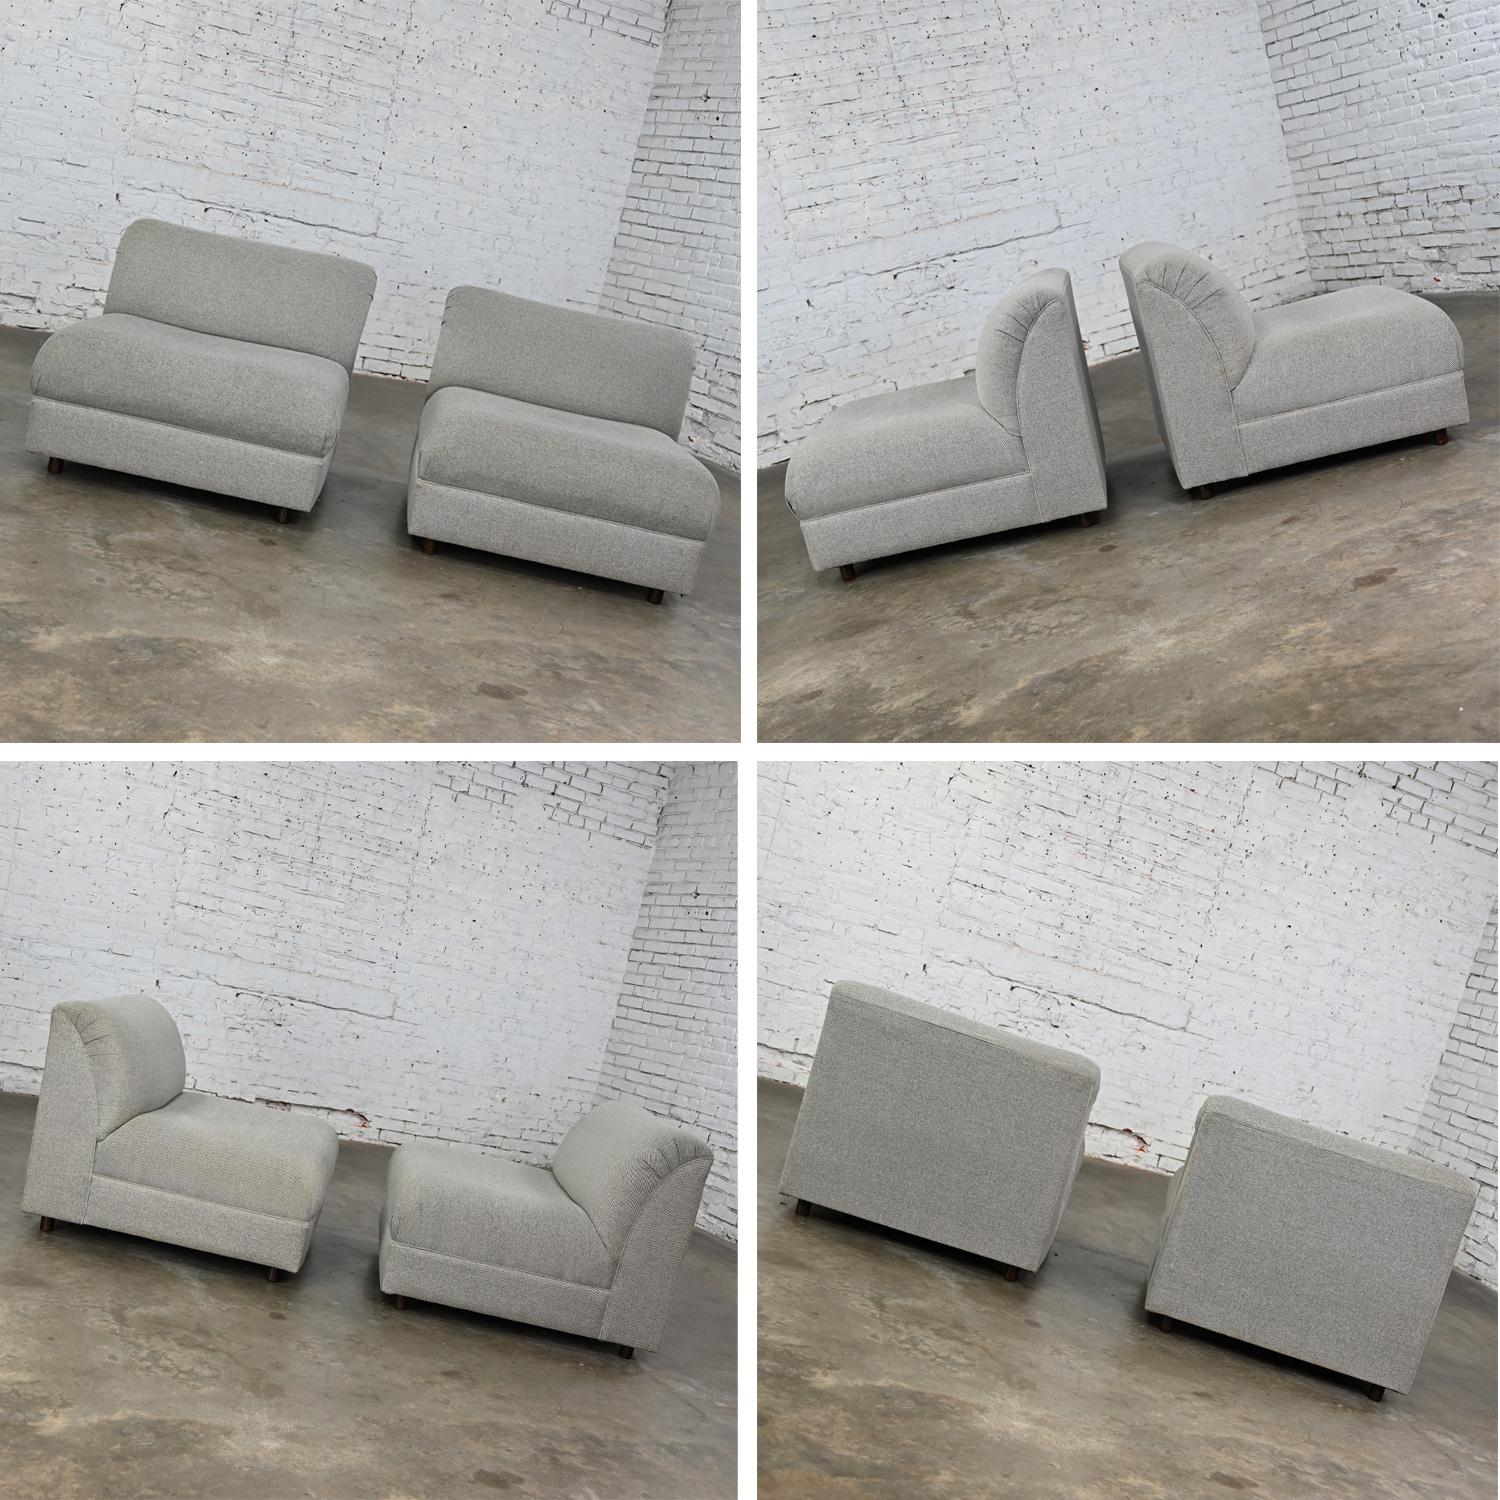 Late 20th Century Modern Modular Sectional Sofa 5 Pieces with Chaise Gray Tweed  For Sale 13